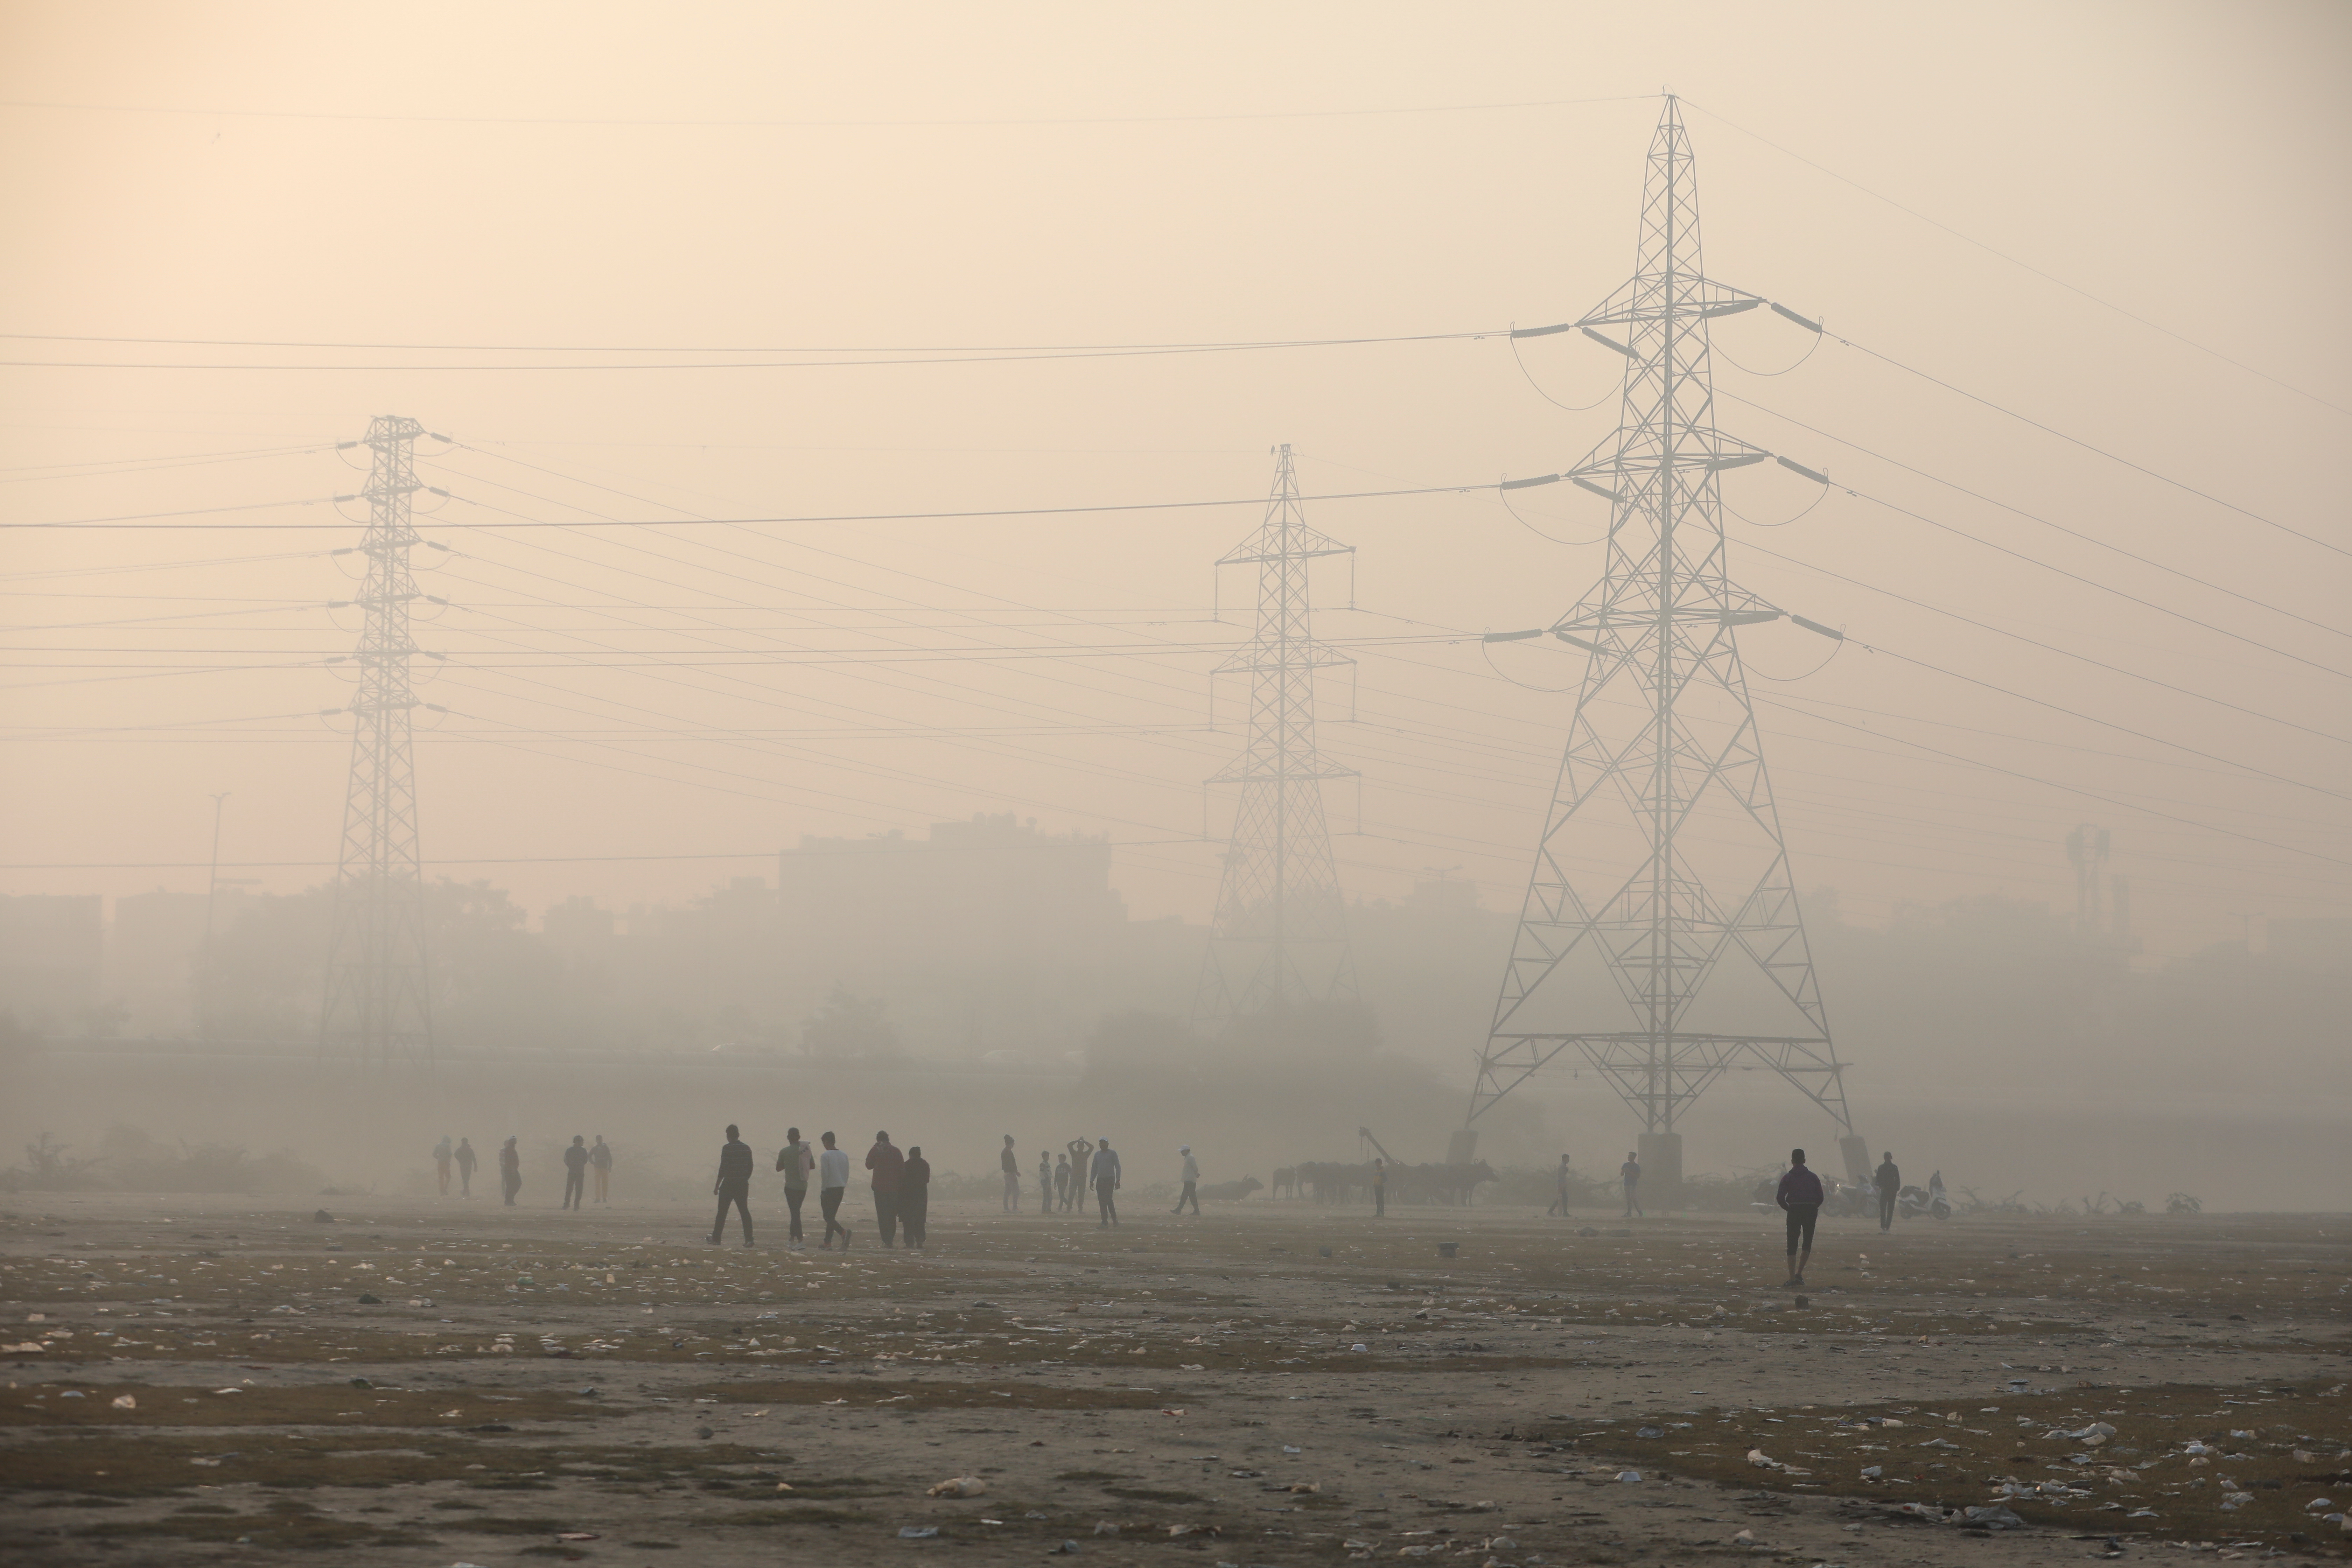 People are seen on the floodplains of the Yamuna river on a smoggy morning in New Delhi